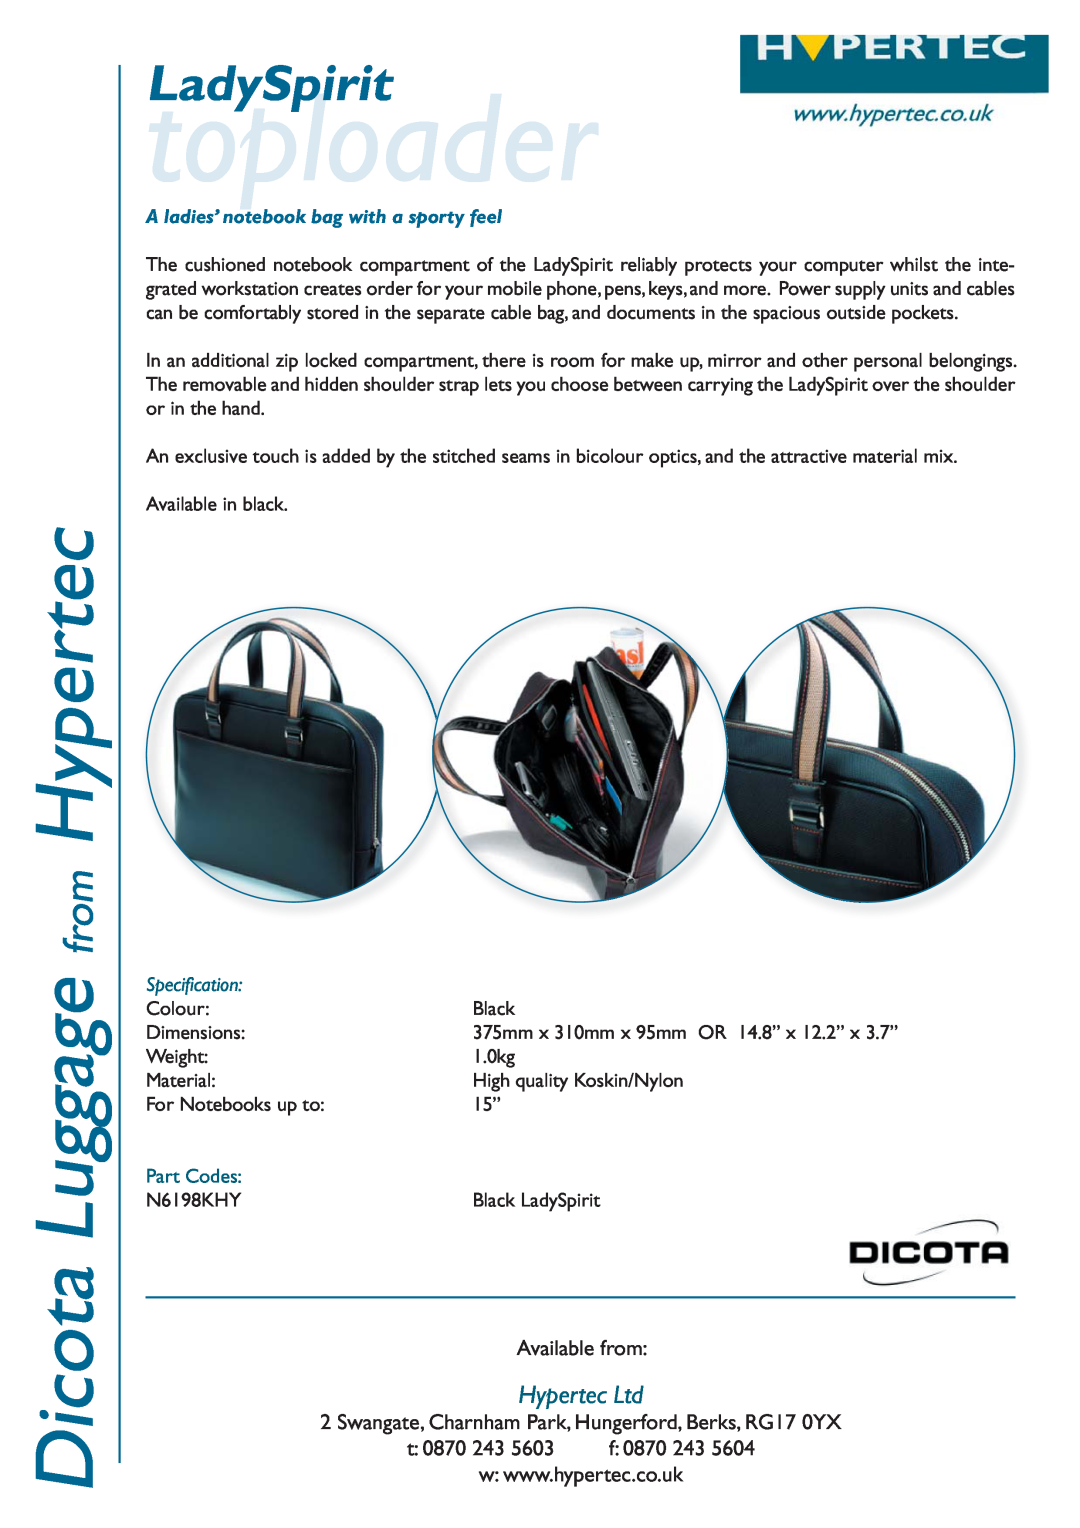 Hypertec N6198KHY dimensions toploader, Dicota Luggage from Hypertec, LadySpirit, Available from, t 0870 243, Part Codes 